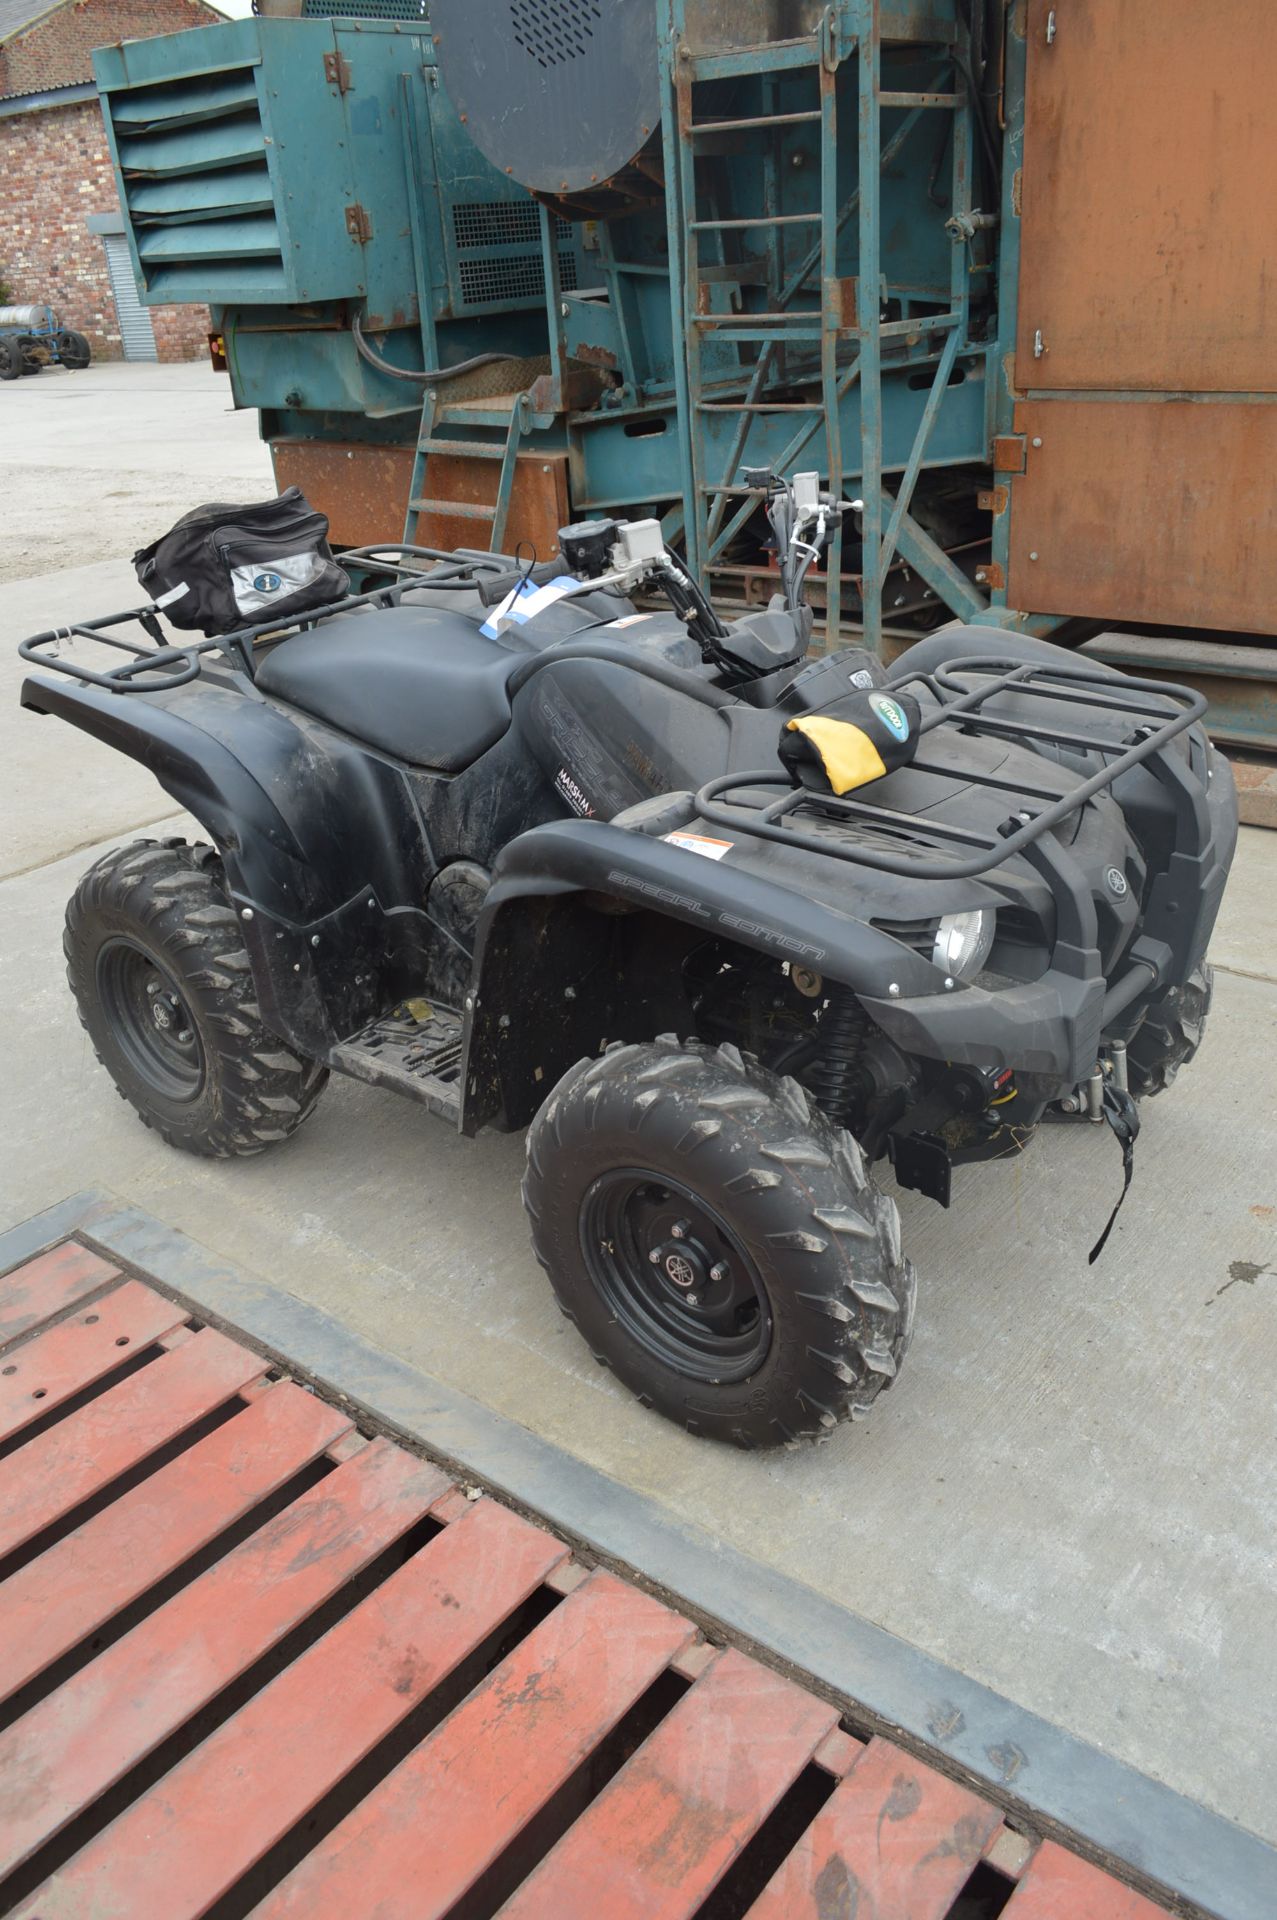 Yamaha GRIZZLY 700 SPECIAL EDITION ATV QUAD, registration no. CN64 AKO, date first registered 07/